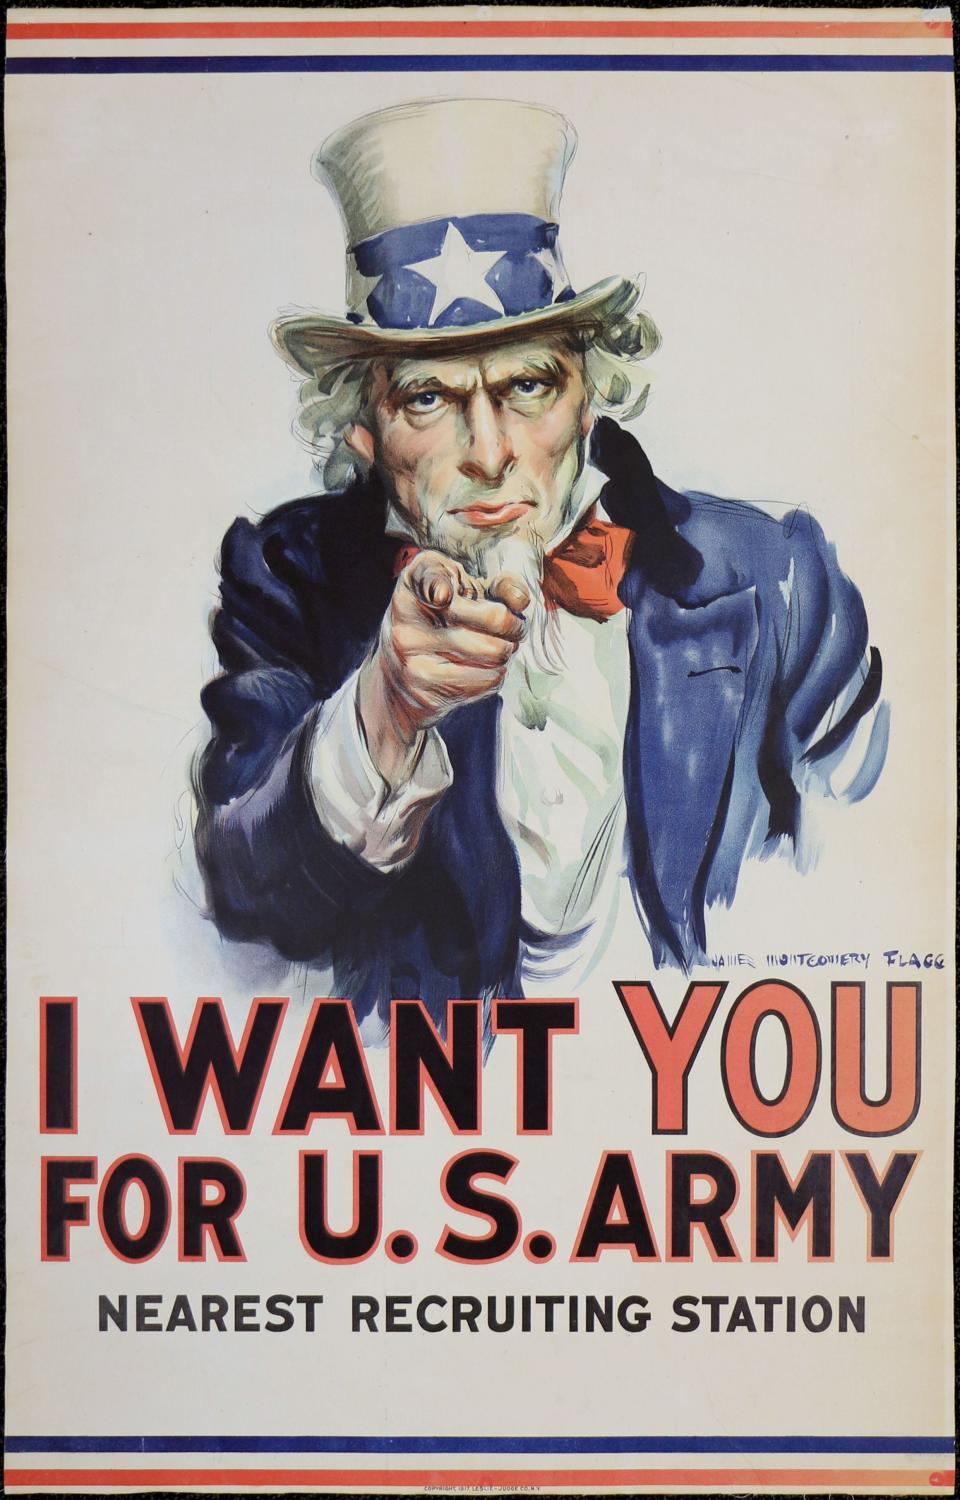 An iconic poster from World War I depicts Uncle Sam recruiting Americans to join the Army.